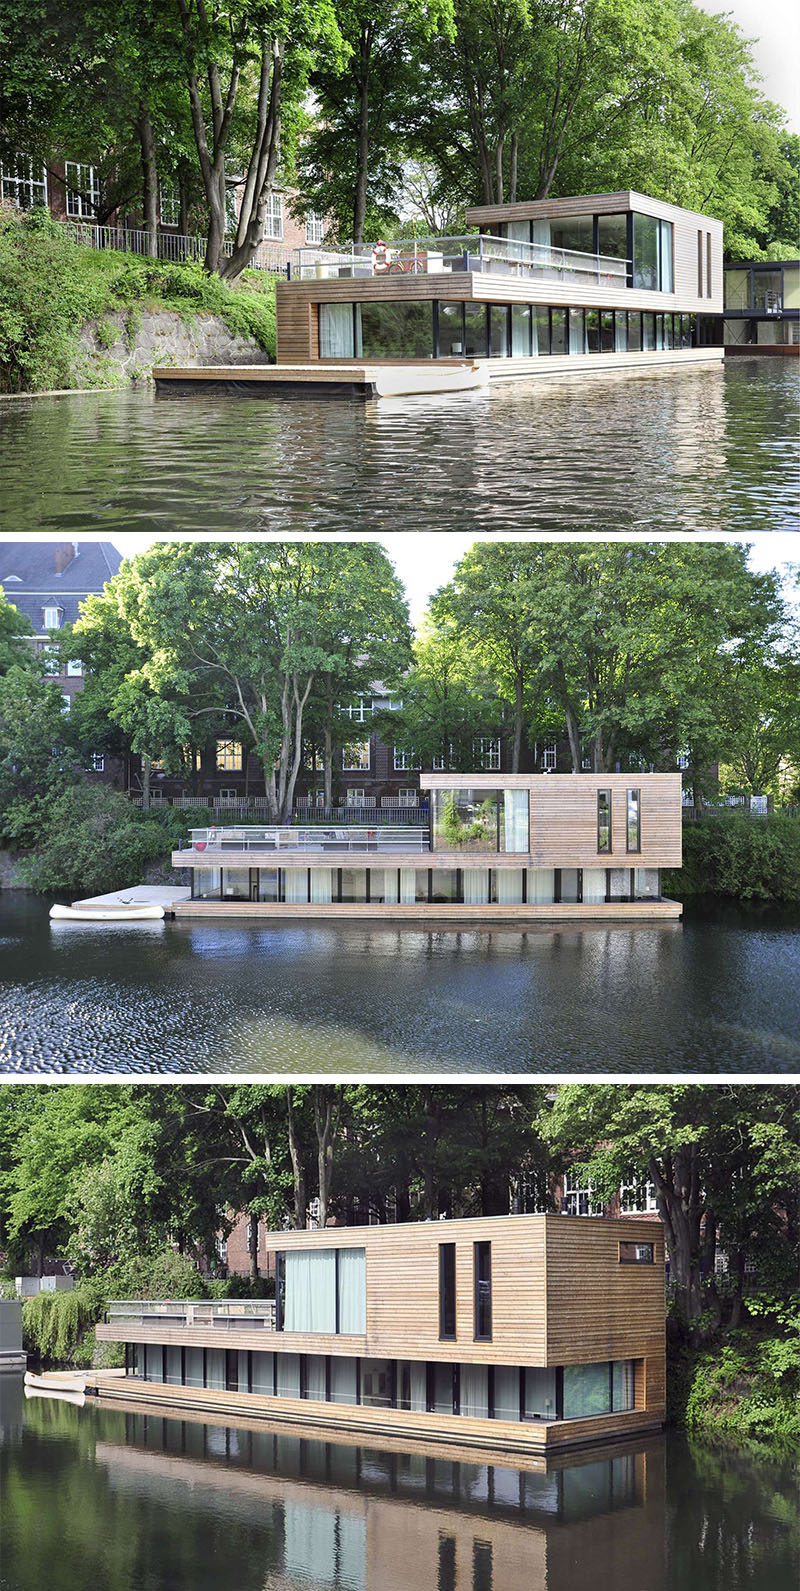 11 Awesome Examples Of Modern House Boats // This floating home has most of the living space on the bottom floor with a deck and kitchen area on overlooking the rest of the canal.